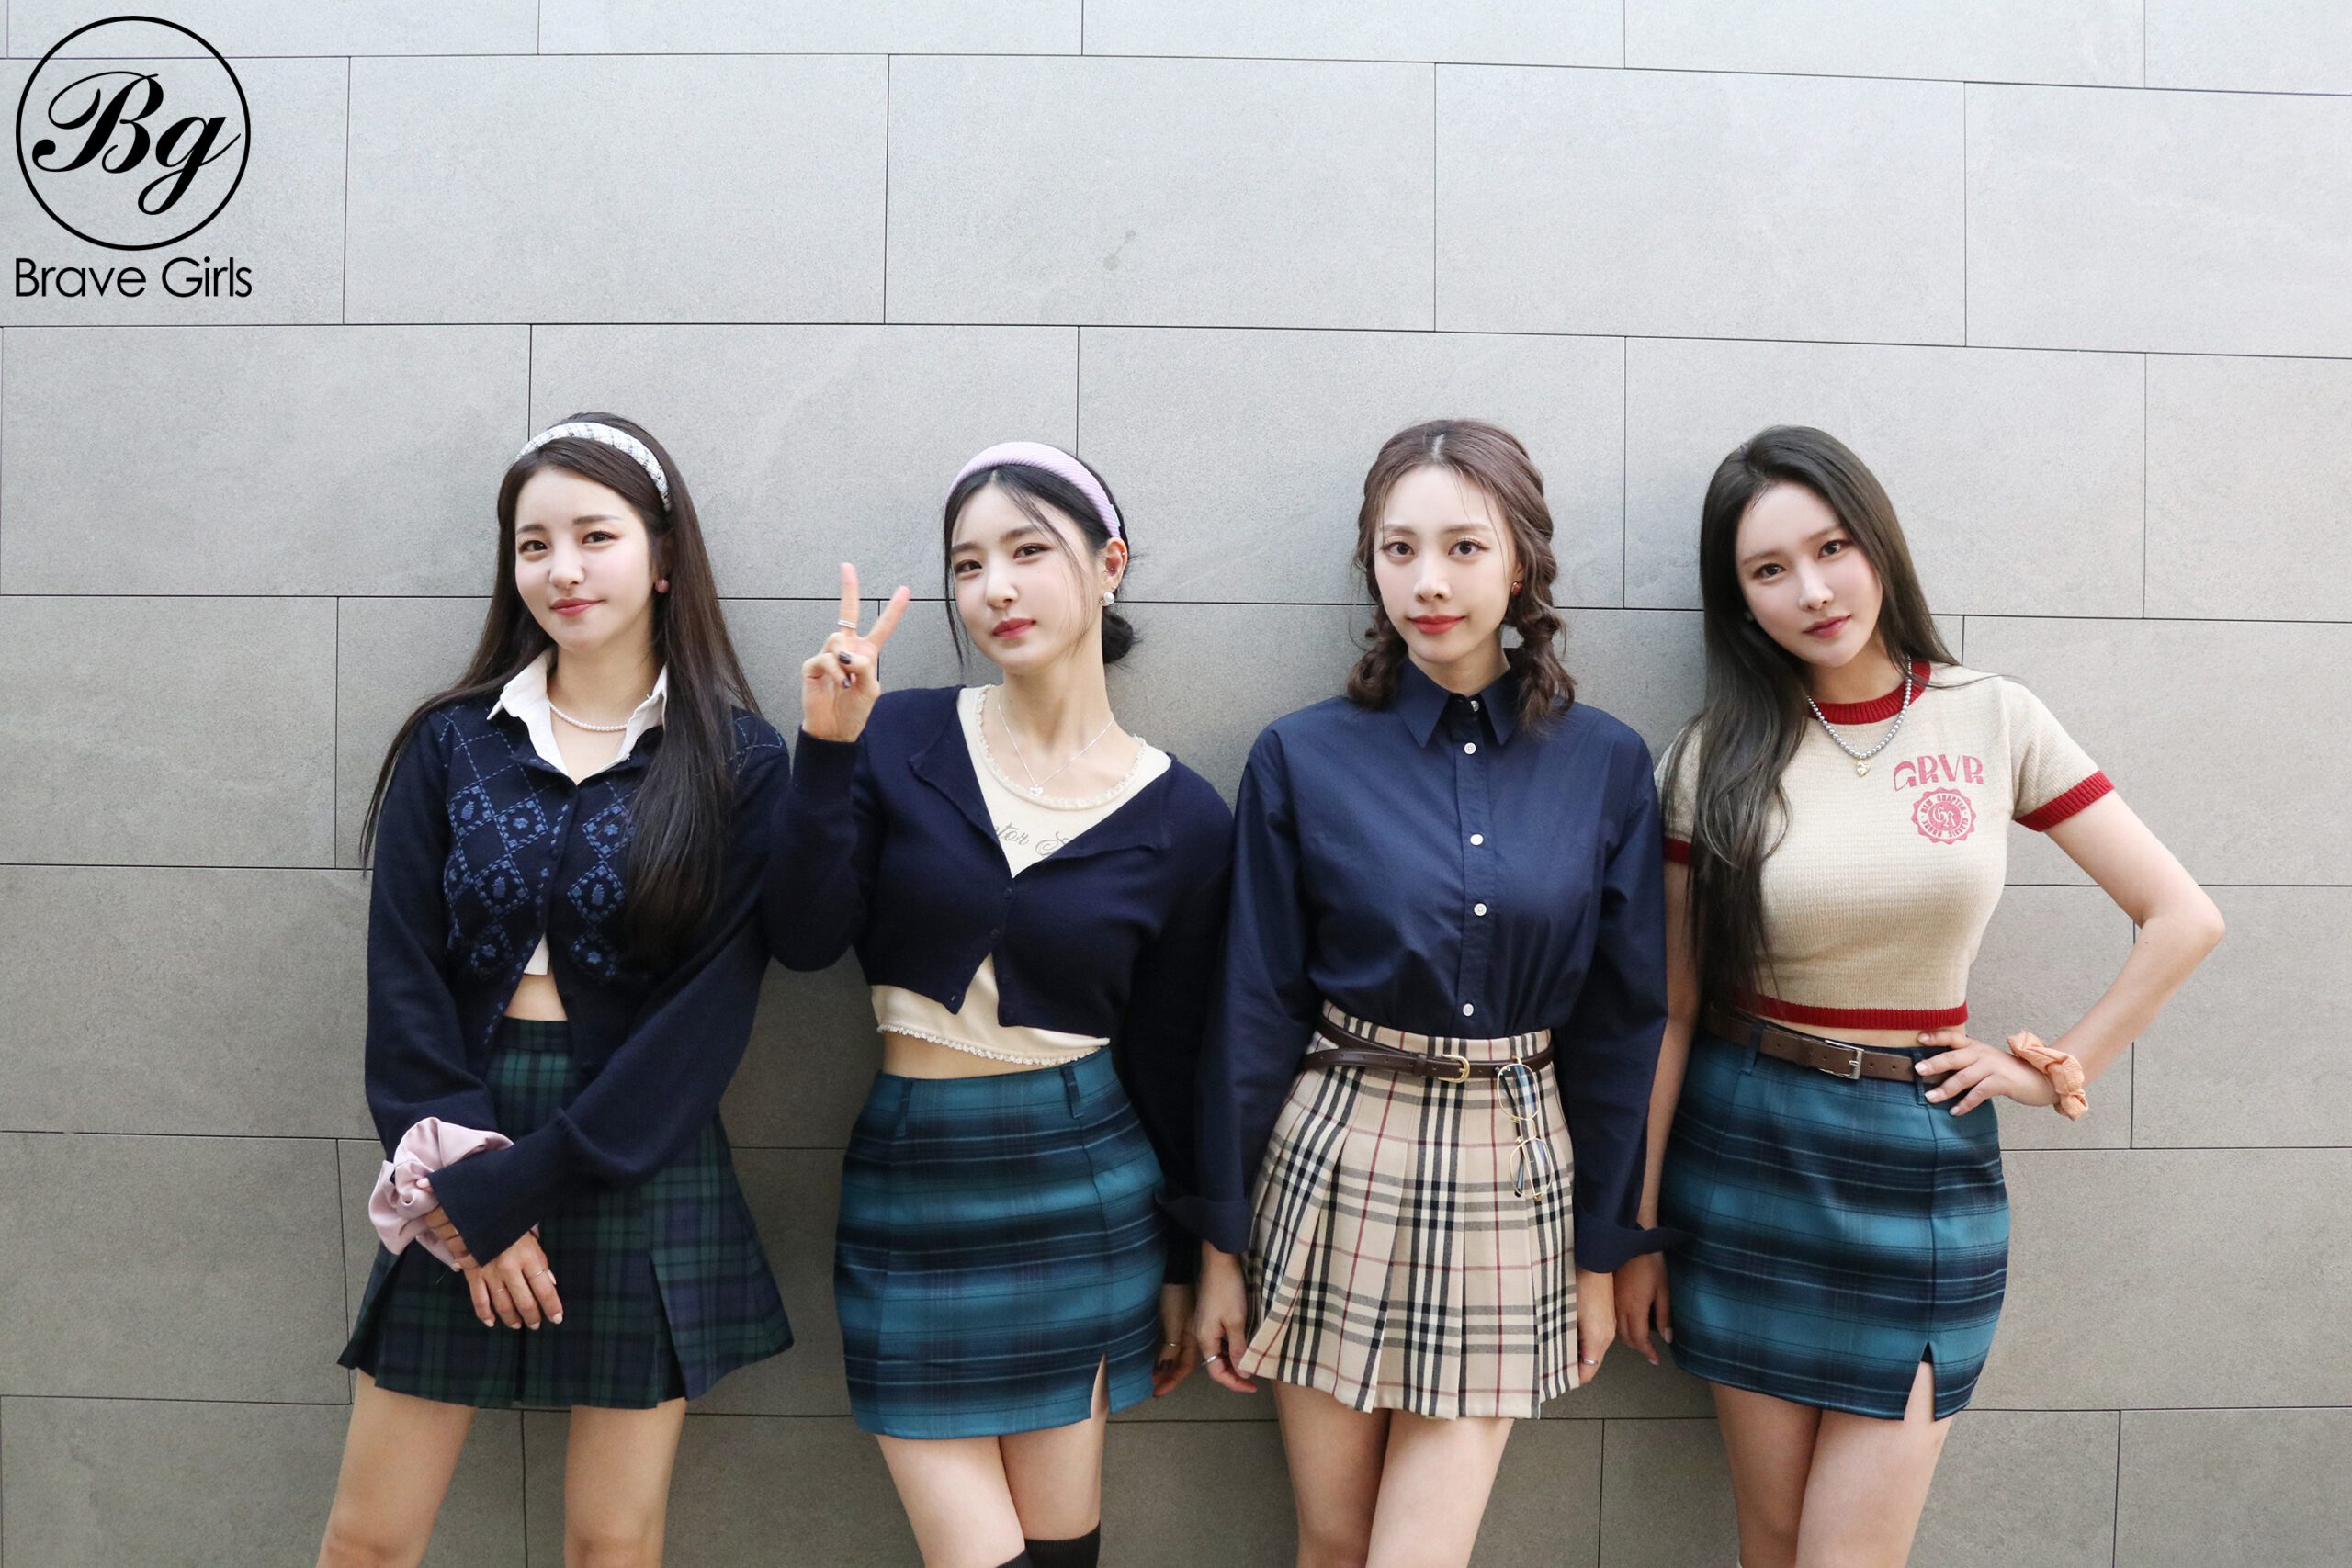 K-pop group Brave Girls disbands after 7 years 